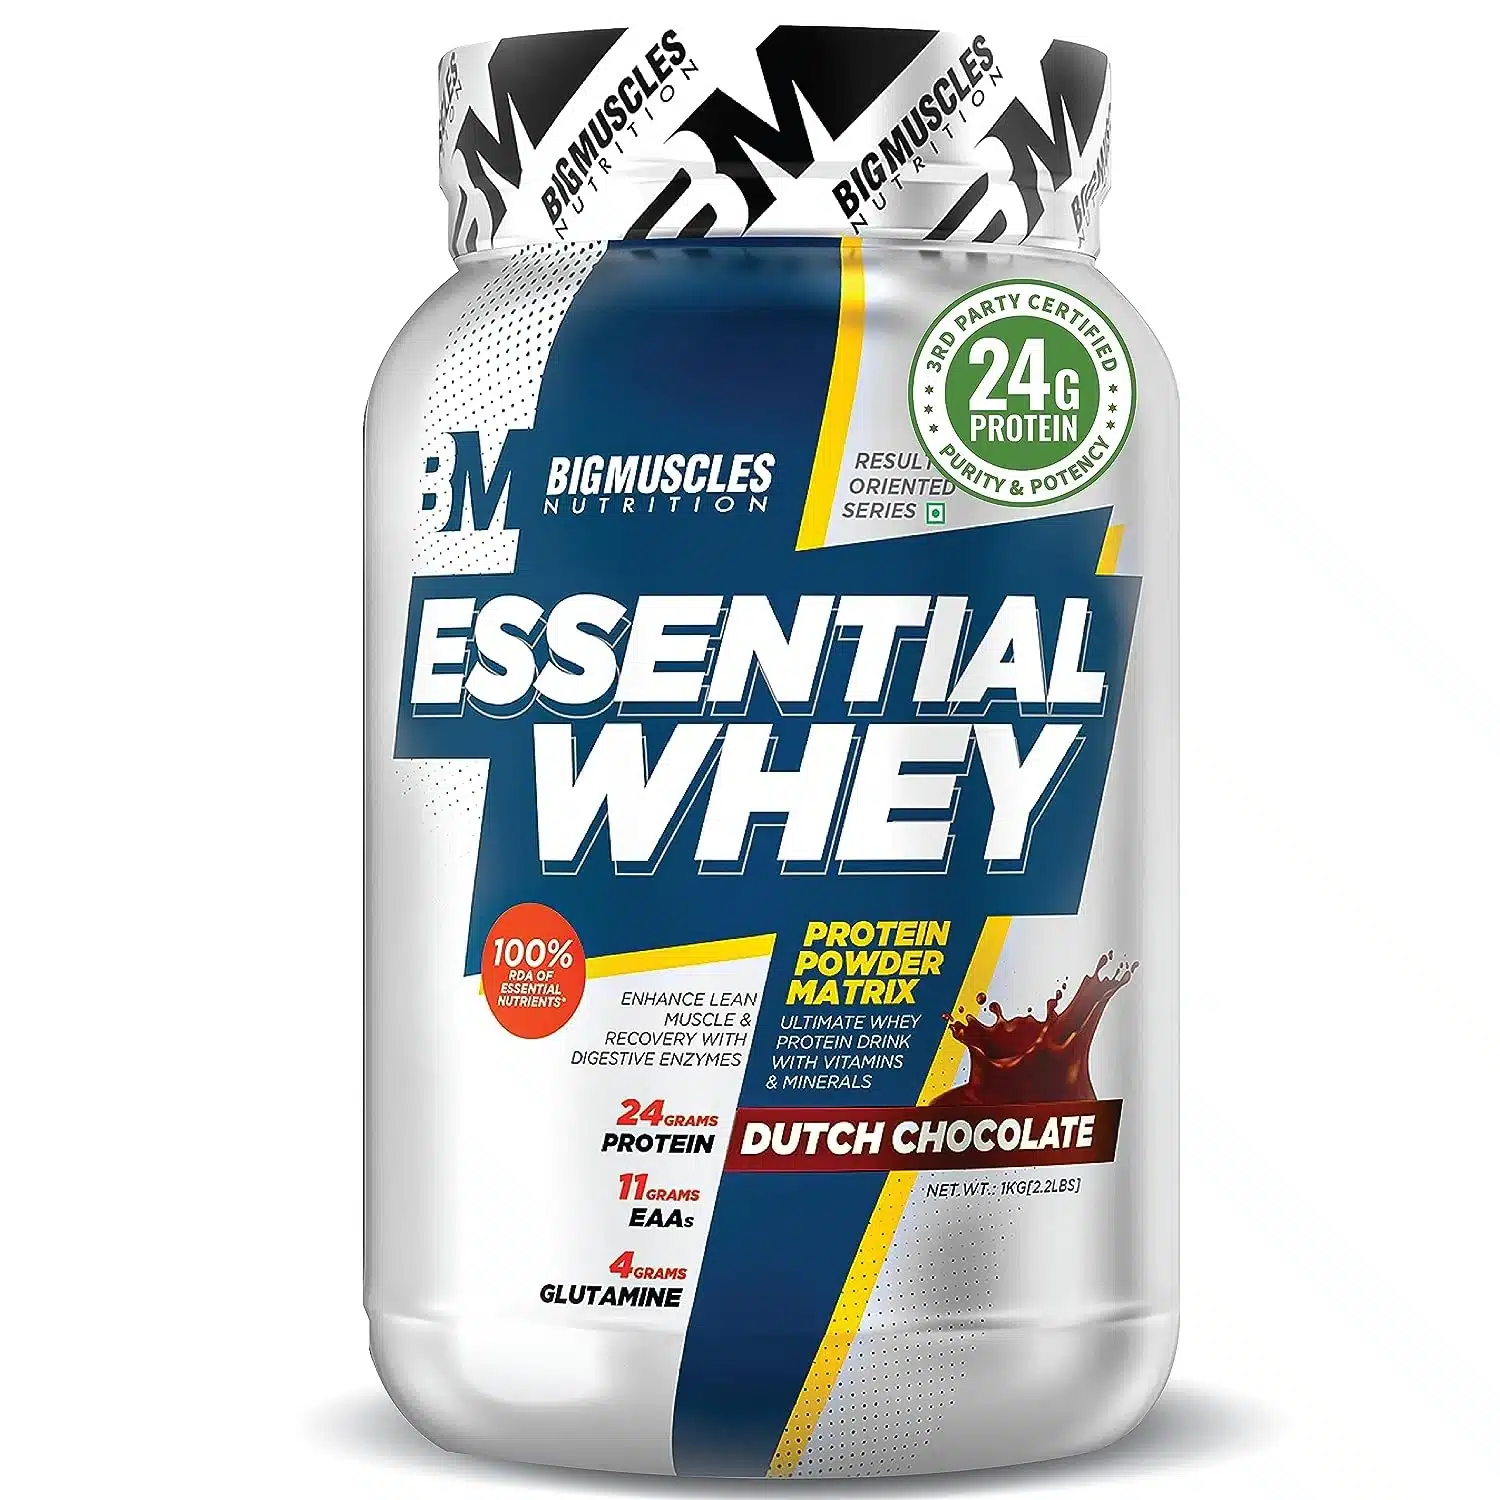 Bigmuscles-Nutrition-Essential-Whey-Protein-1Kg.webp